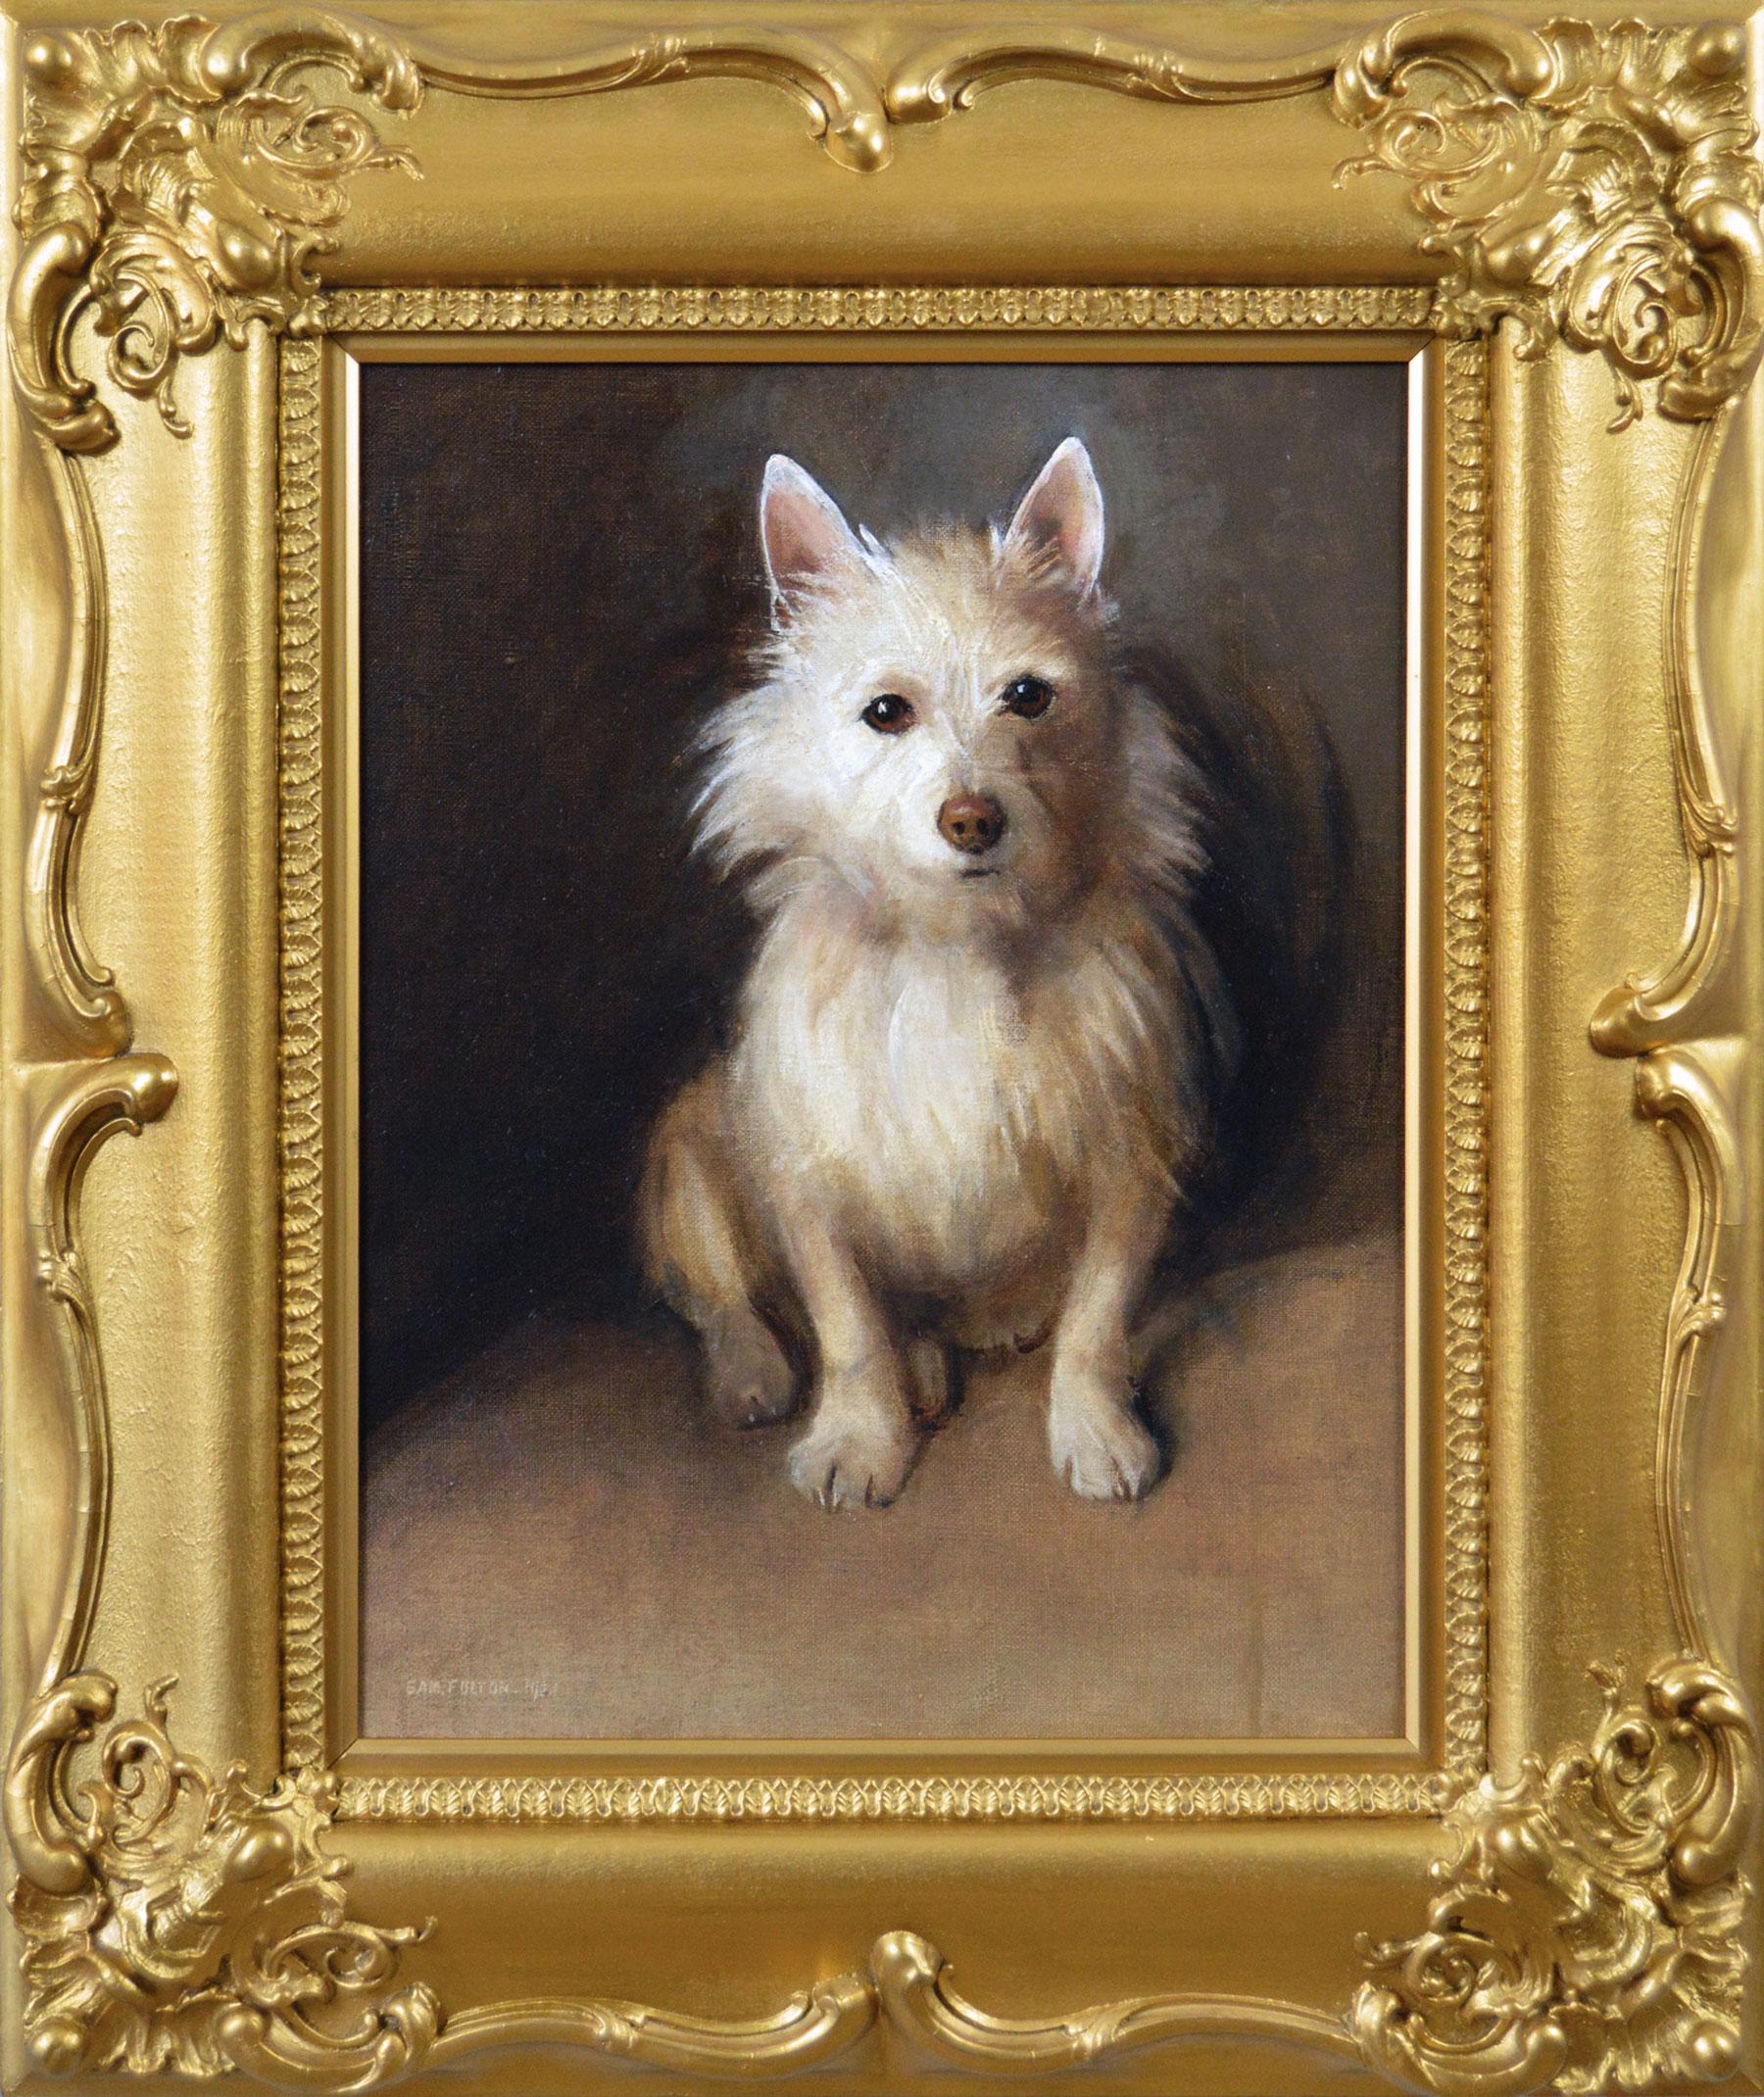 Genre animal oil painting of a West Highland Terrier dog